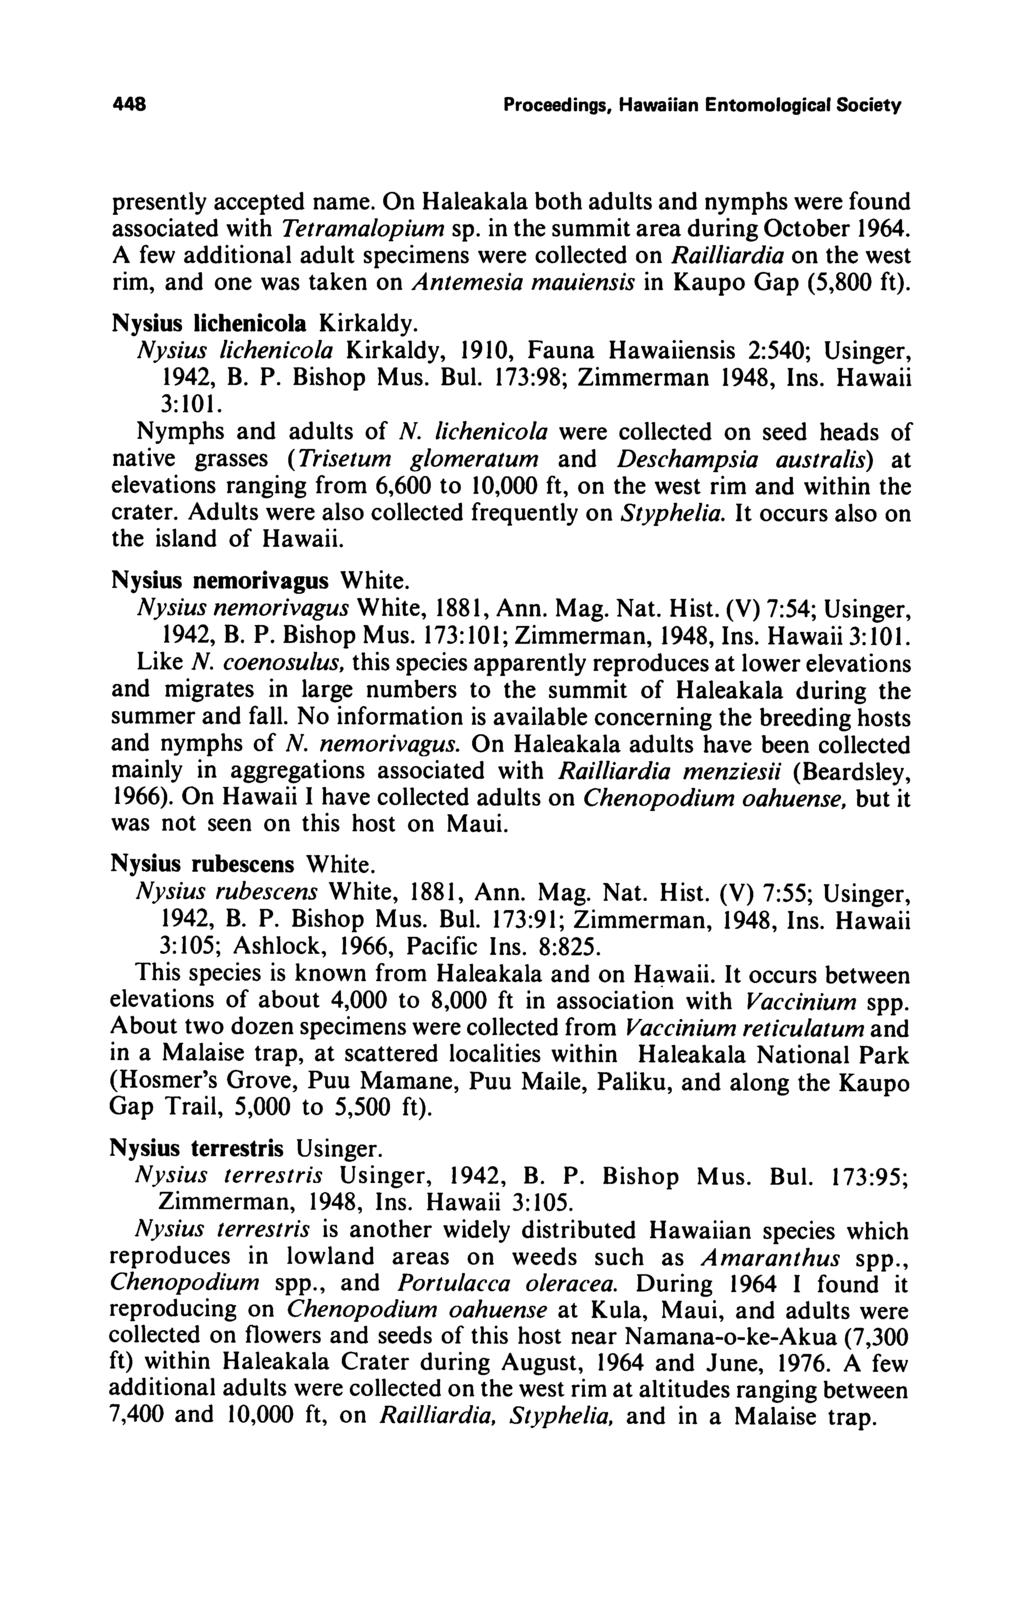 448 Proceedings, Hawaiian Entomological Society presently accepted name. On Haleakala both adults and nymphs were found associated with Tetramalopium sp. in the summit area during October 1964.